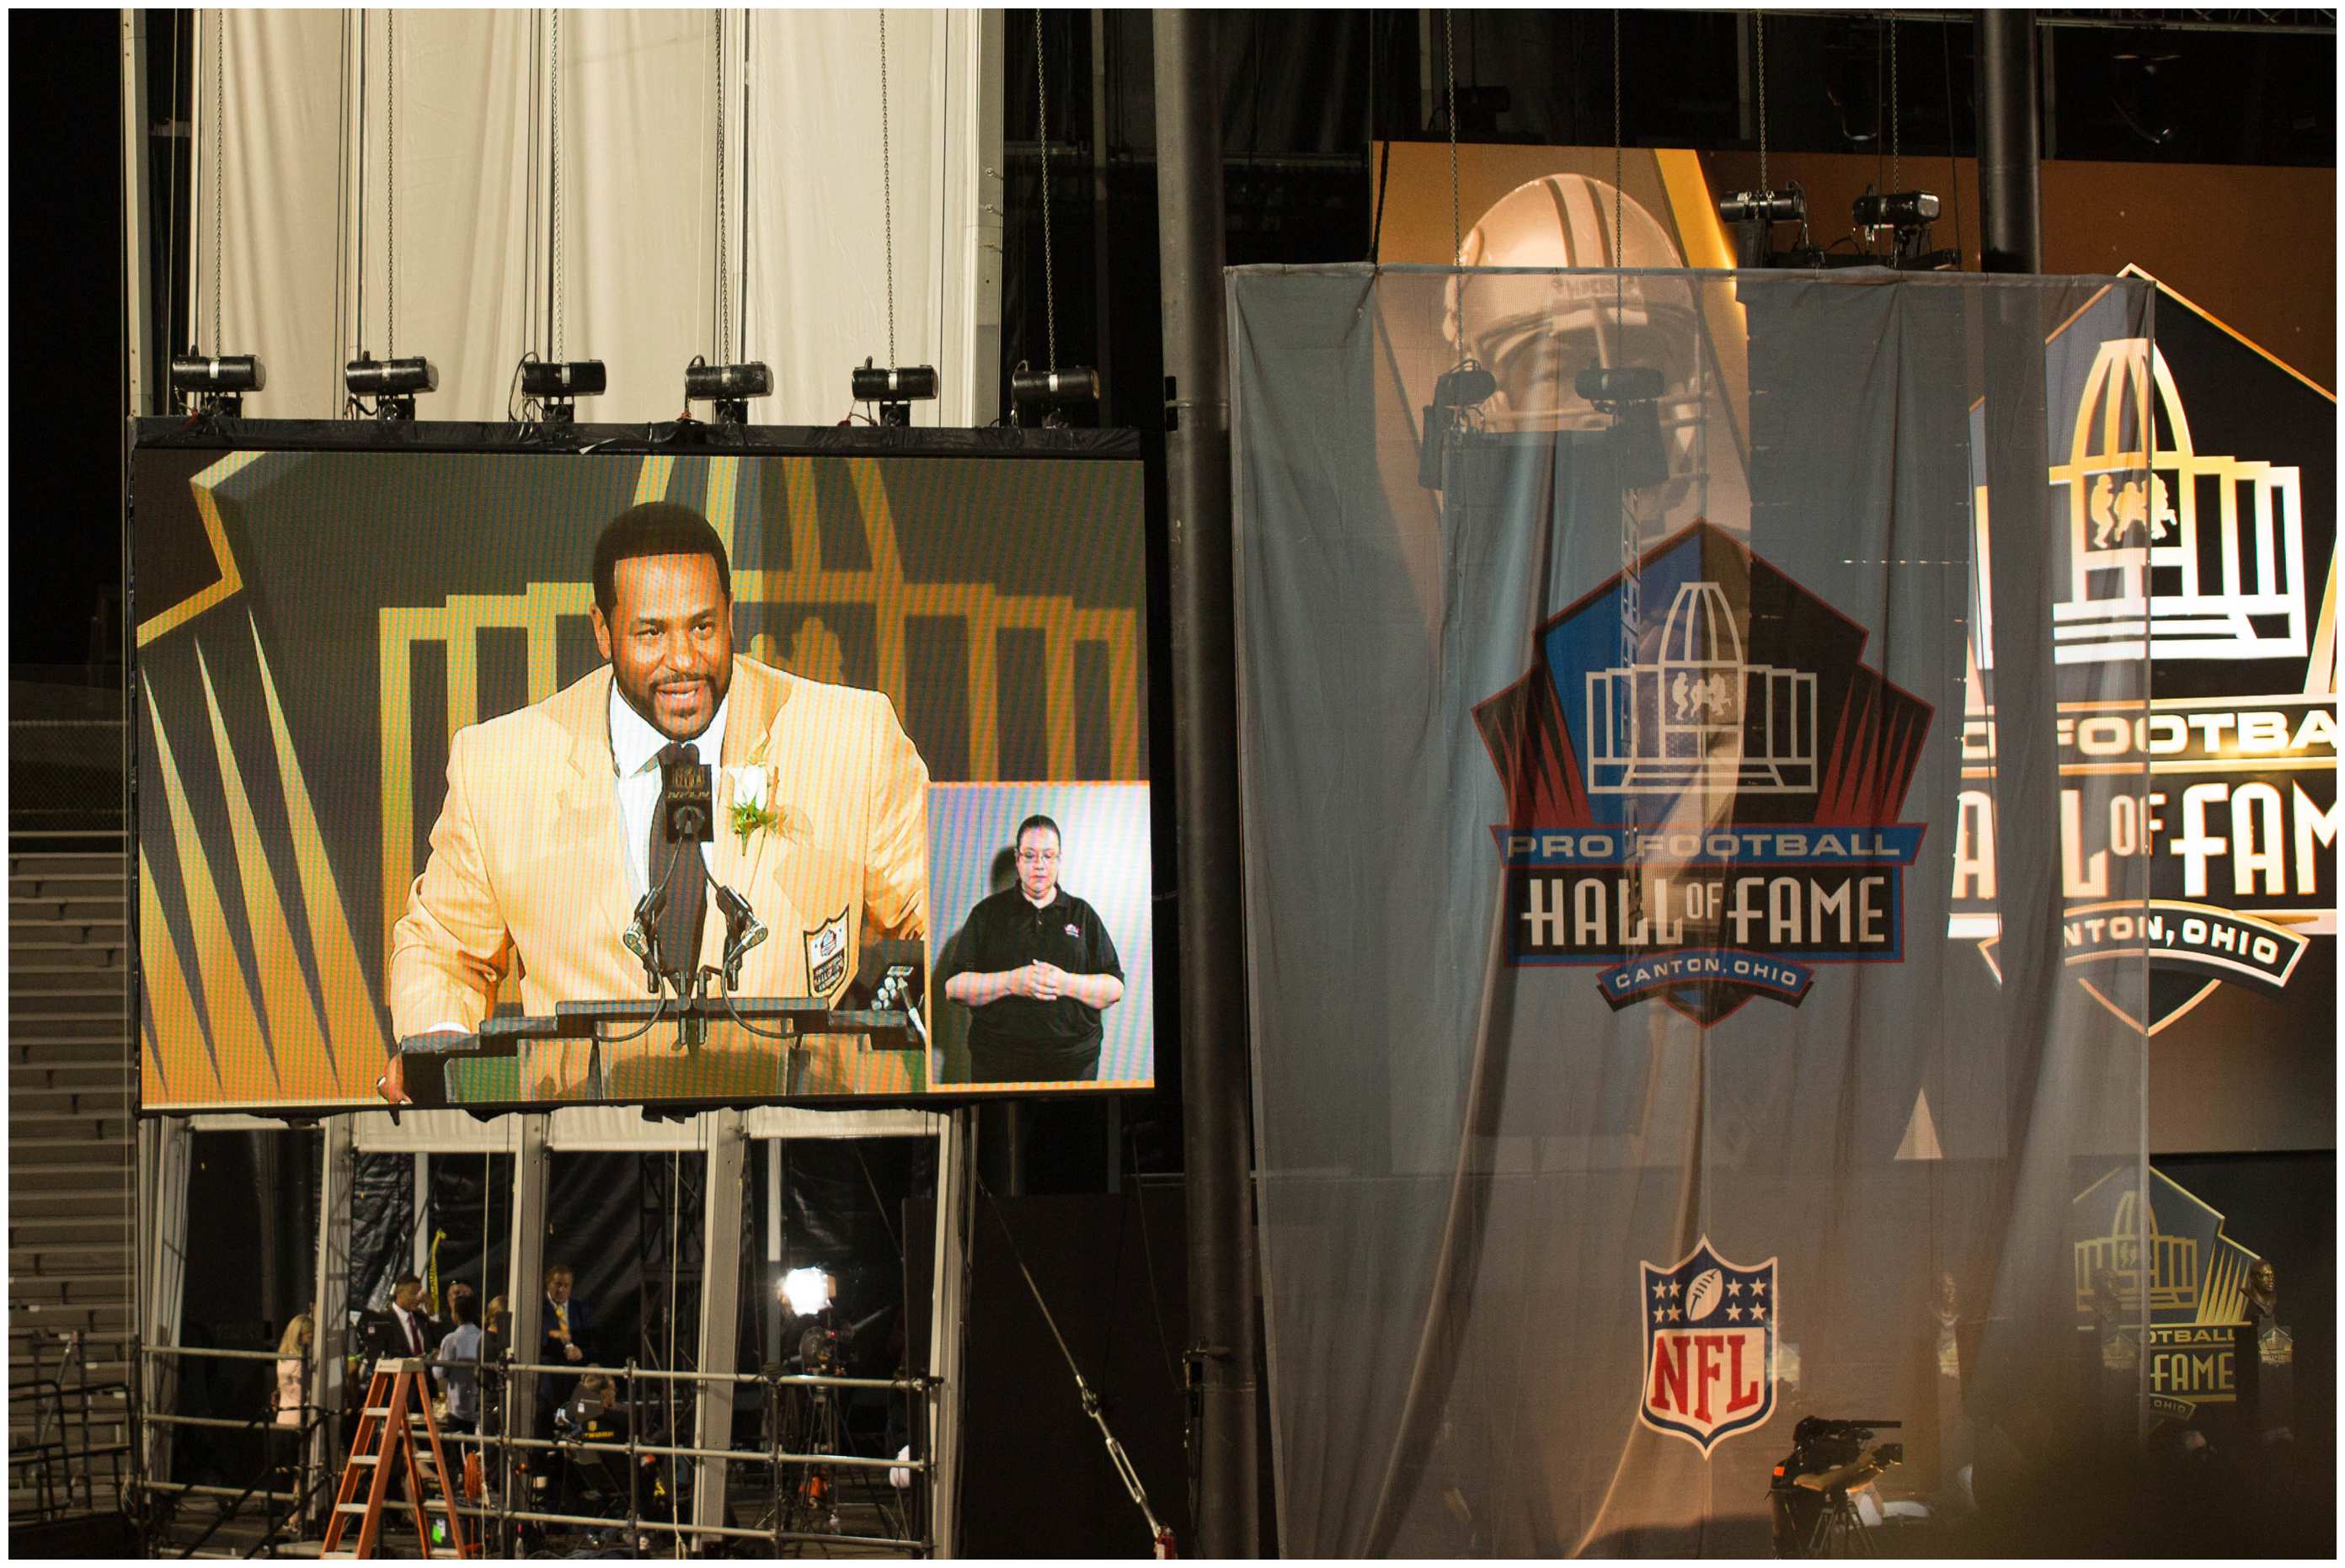 2015-football-hall-of-fame-induction-ceremony-32.jpg